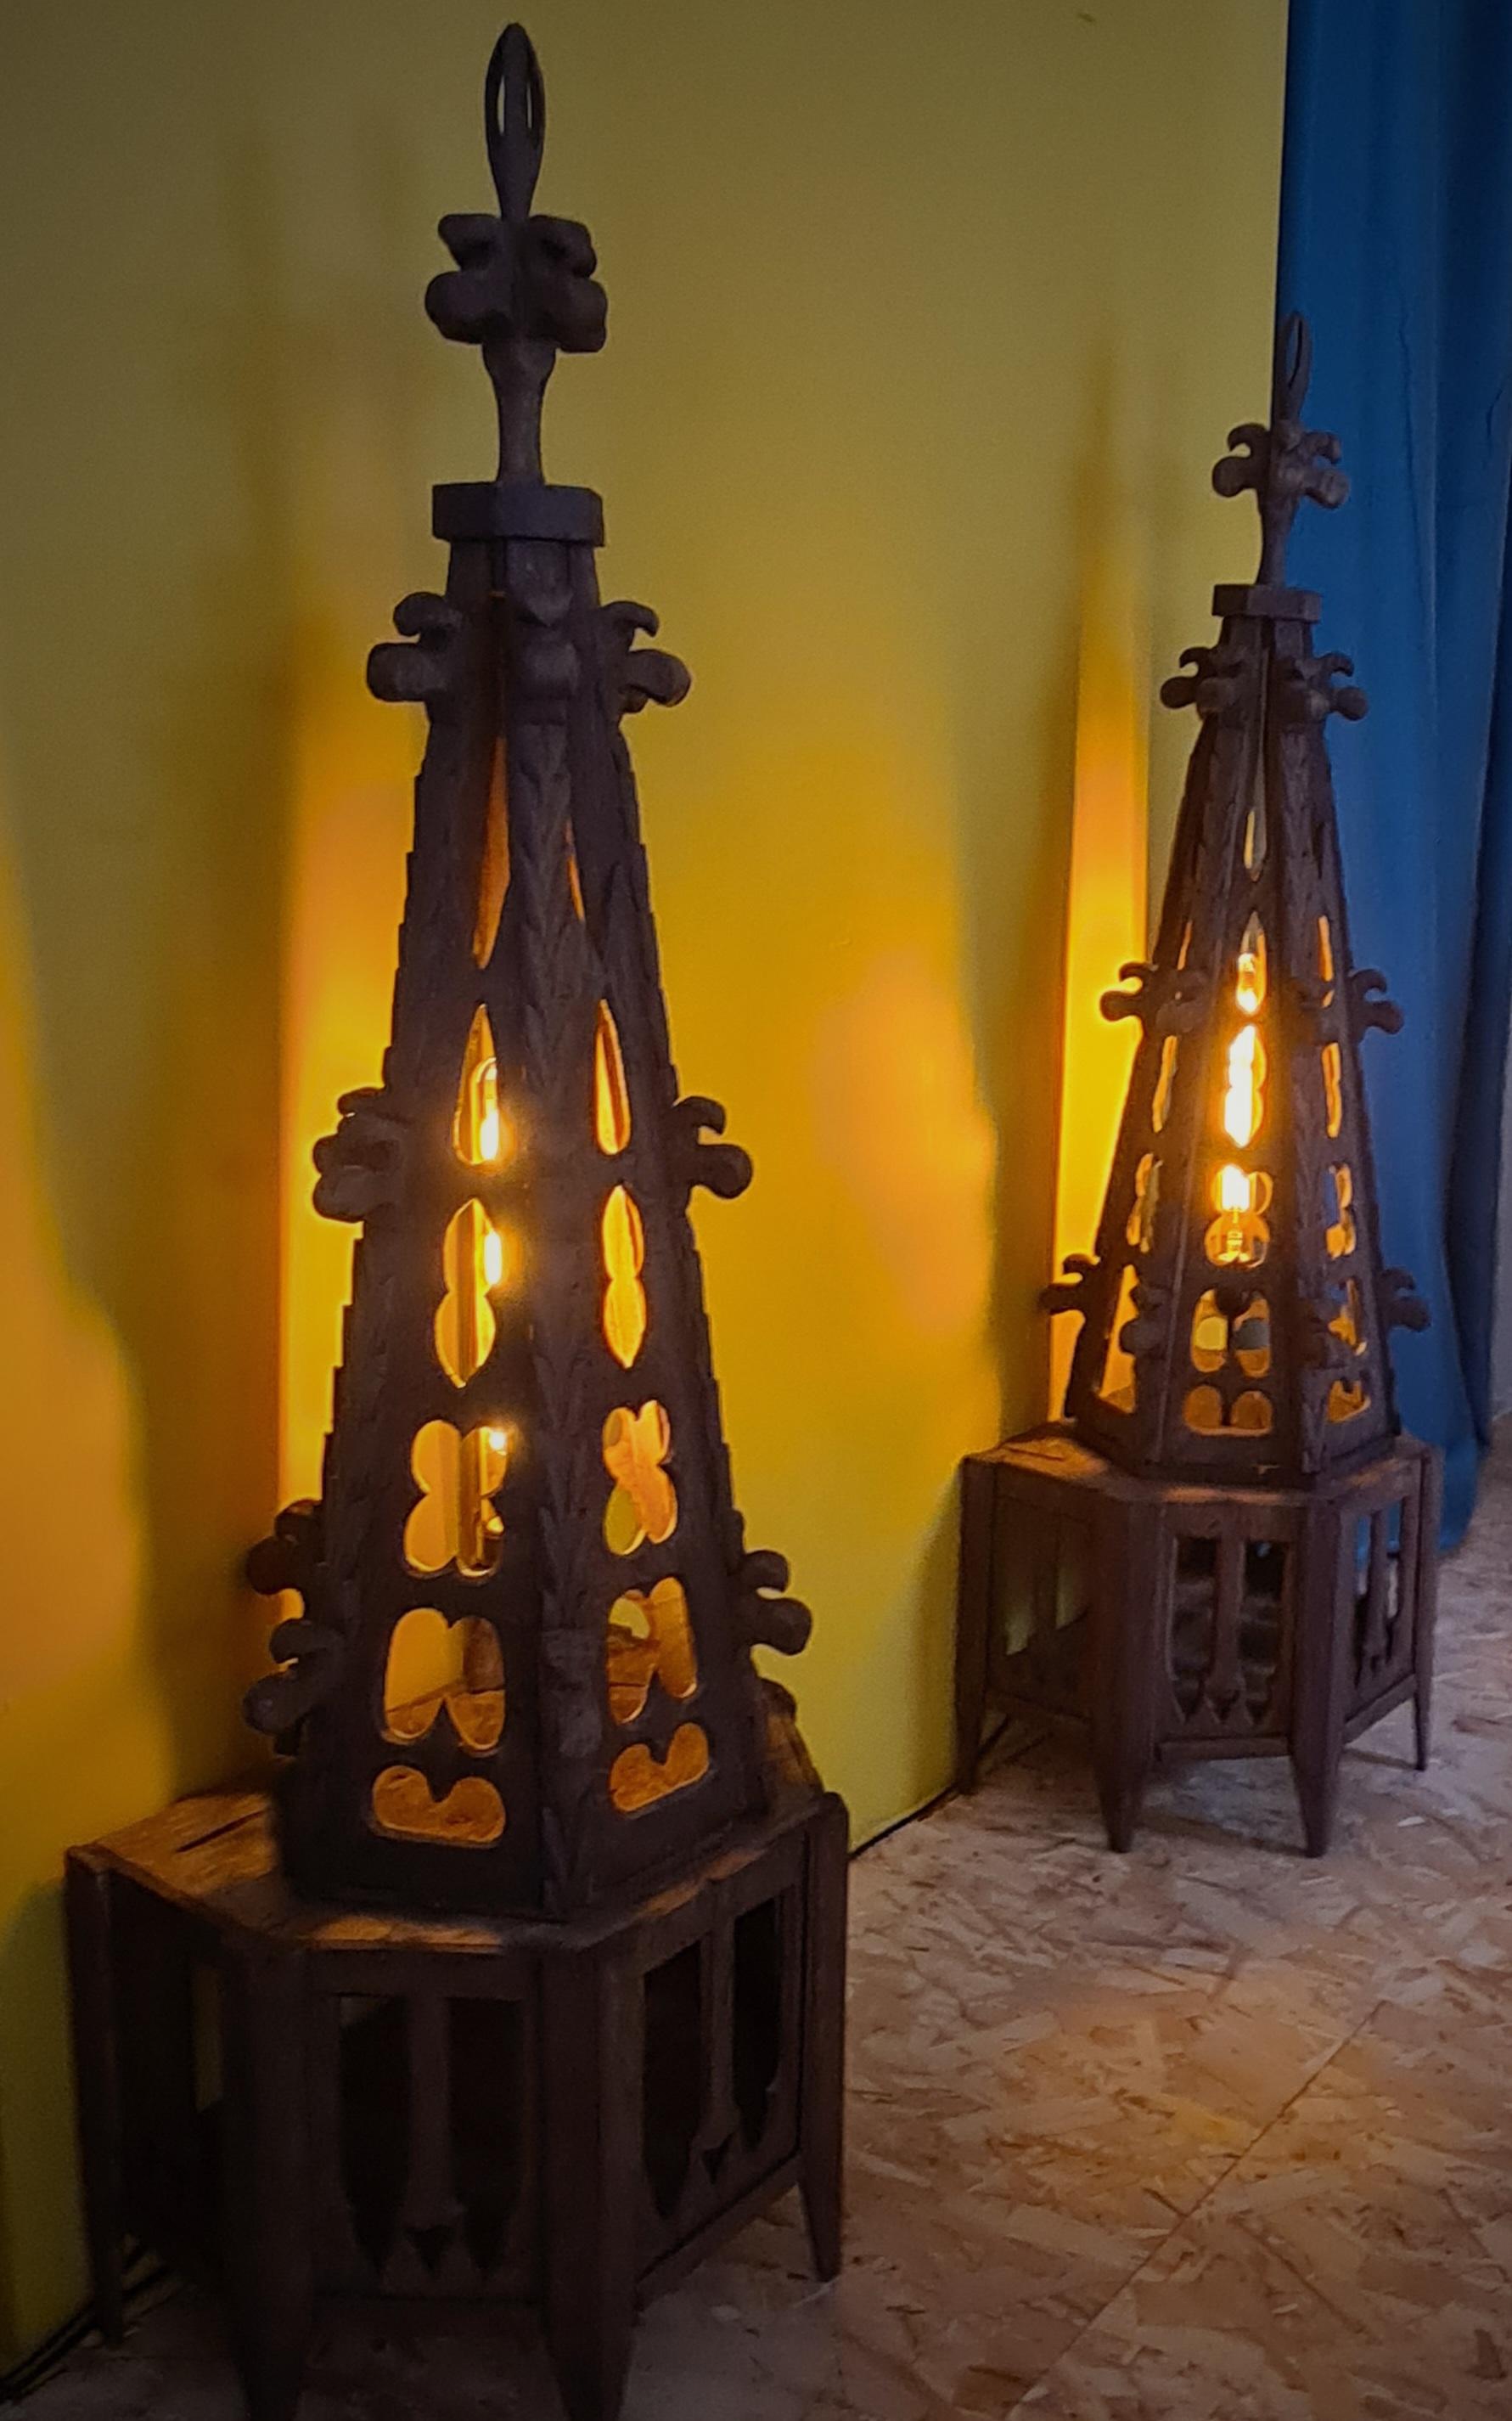 Magnificent church hotel ornament or pinnacle circa 1880, in Gothic style, these incredible ornaments have been transformed into a floor lamp to give your interiors a unique touch
carved wood, electrification to standards, magnificent